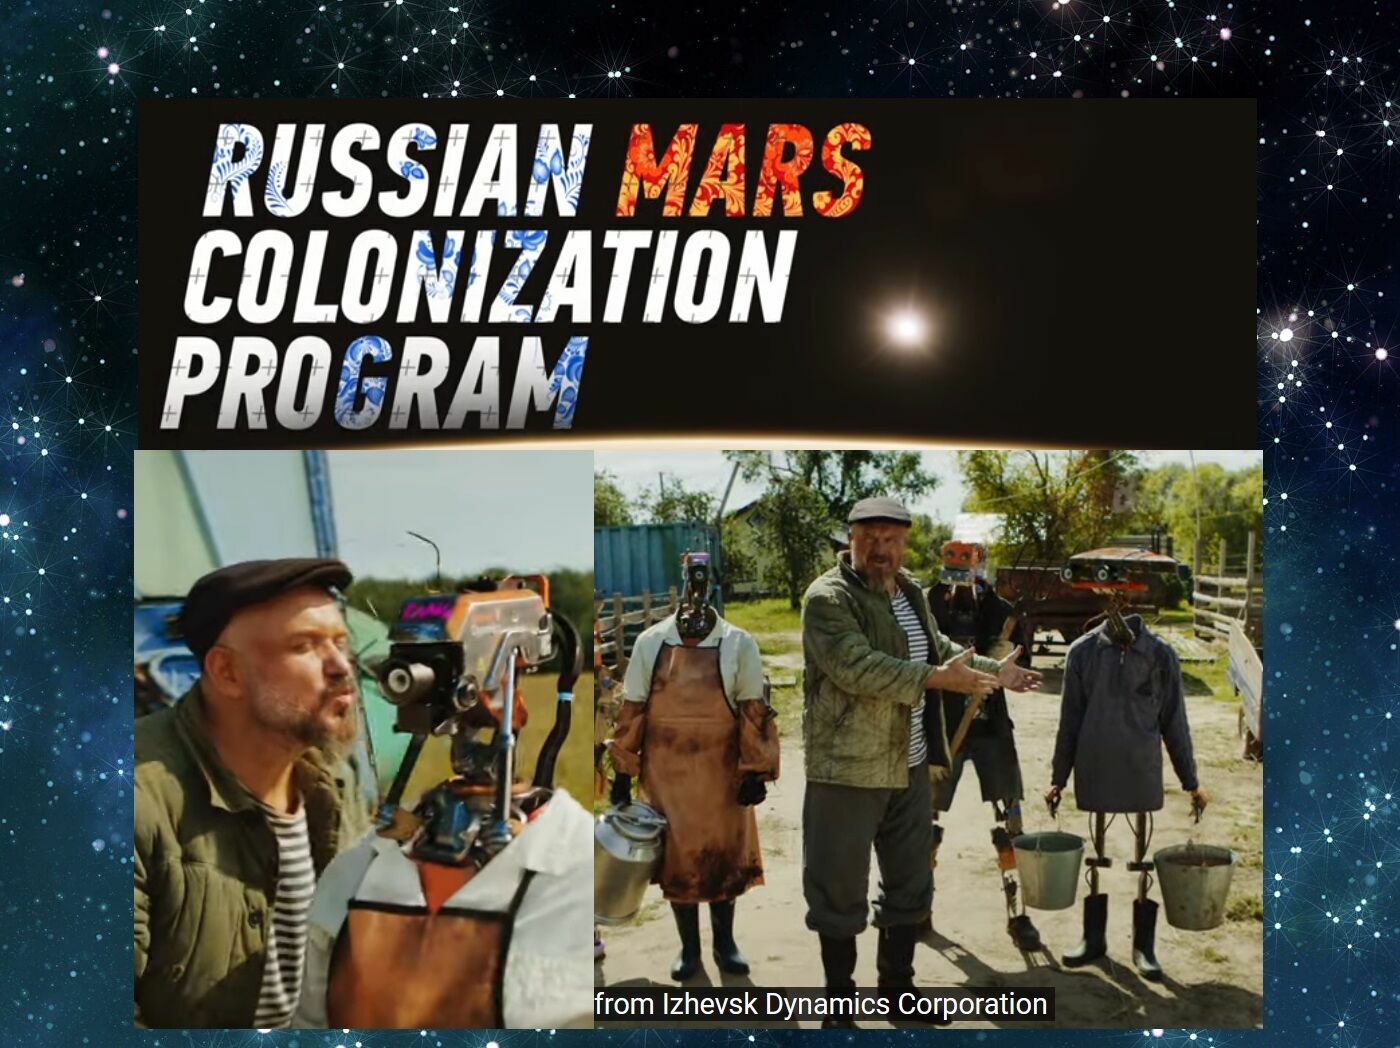 Love and androids: a video about a Russian cyberpunk village on Mars conquers the Internet